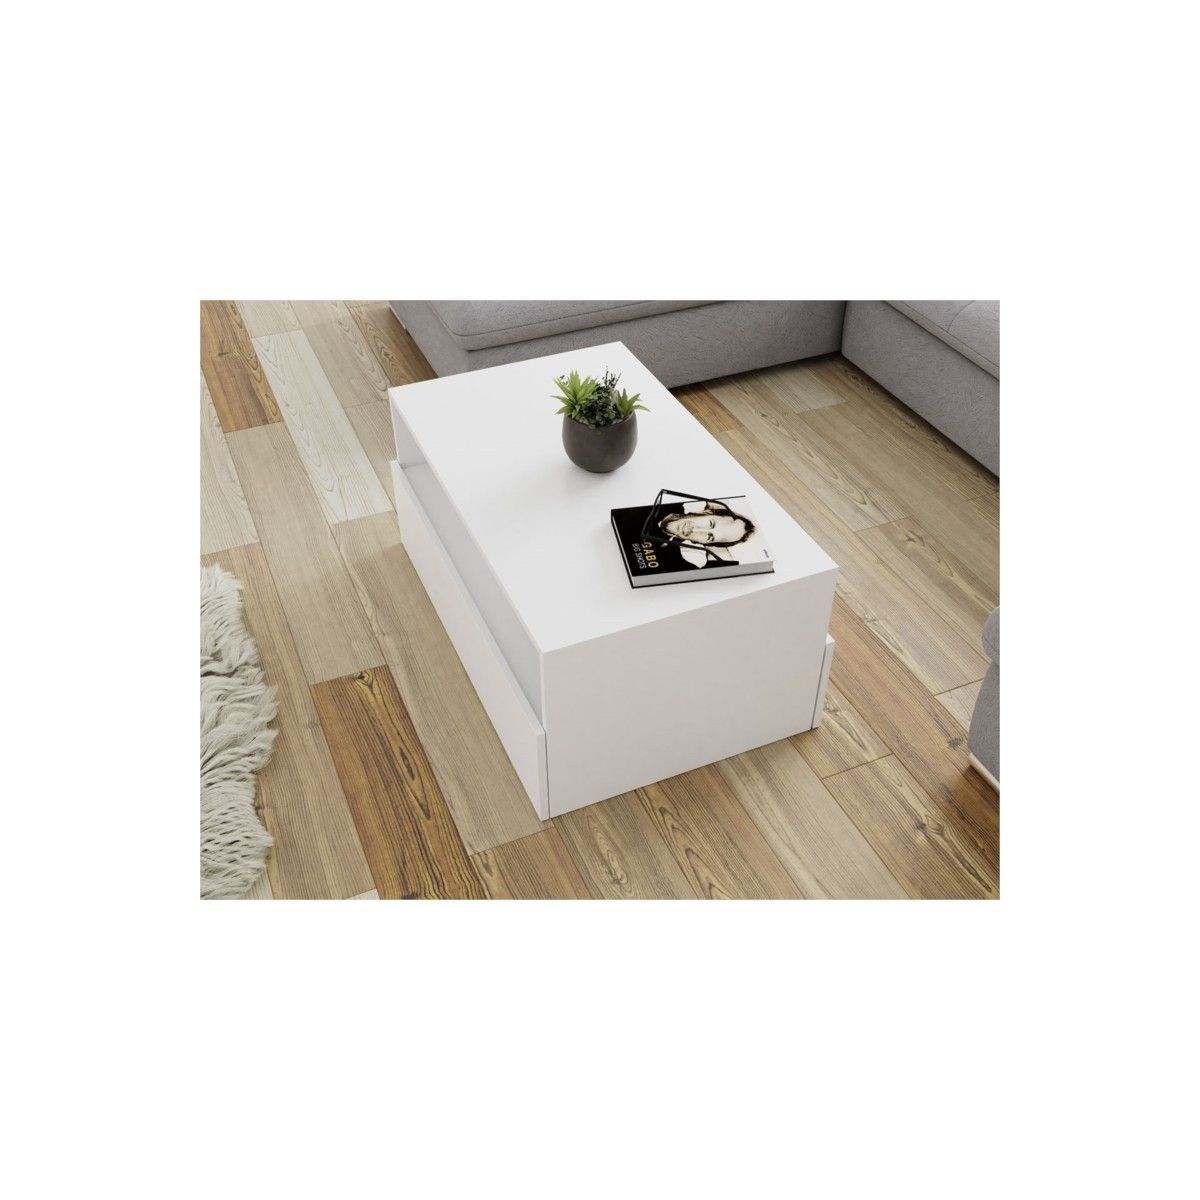 Coffee Table 2 Drawers 90 Cm Drek (white) – Amp Story 8929 Intended For 2 Drawer Coffee Tables (View 6 of 15)